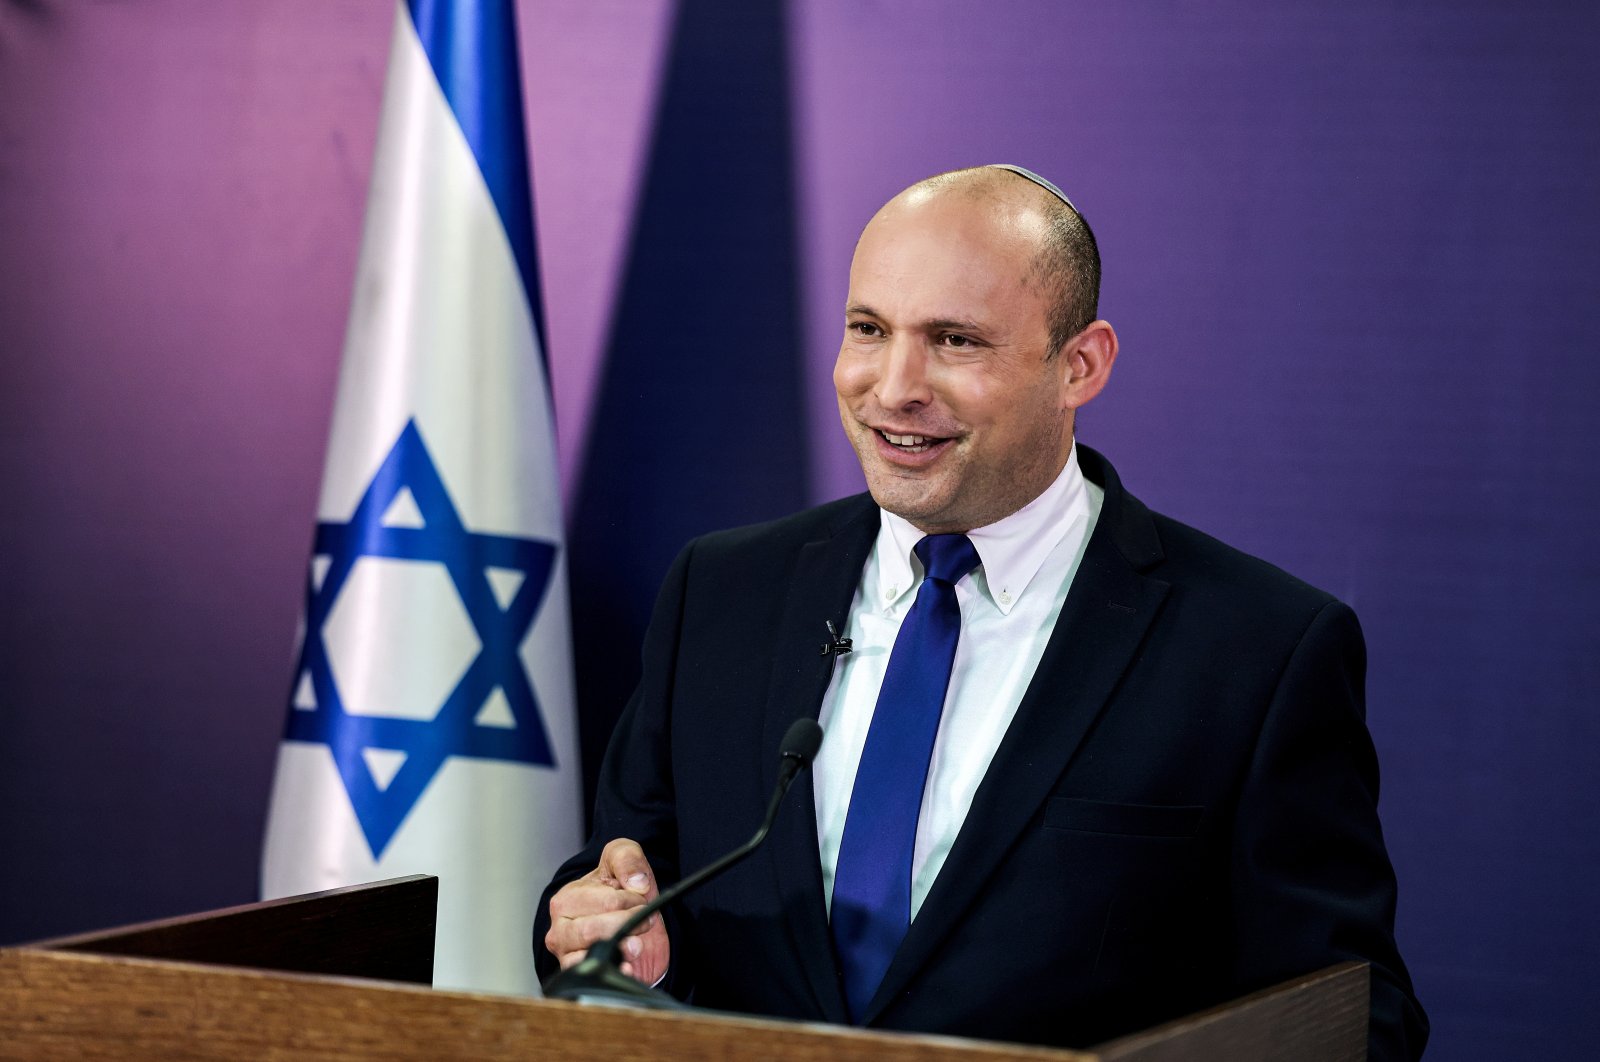 Naftali Bennett, Israeli Parliament member from the Yamina party, gives a statement at parliament, West Jerusalem, Israel, June 6, 2021. (Reuters Photo)